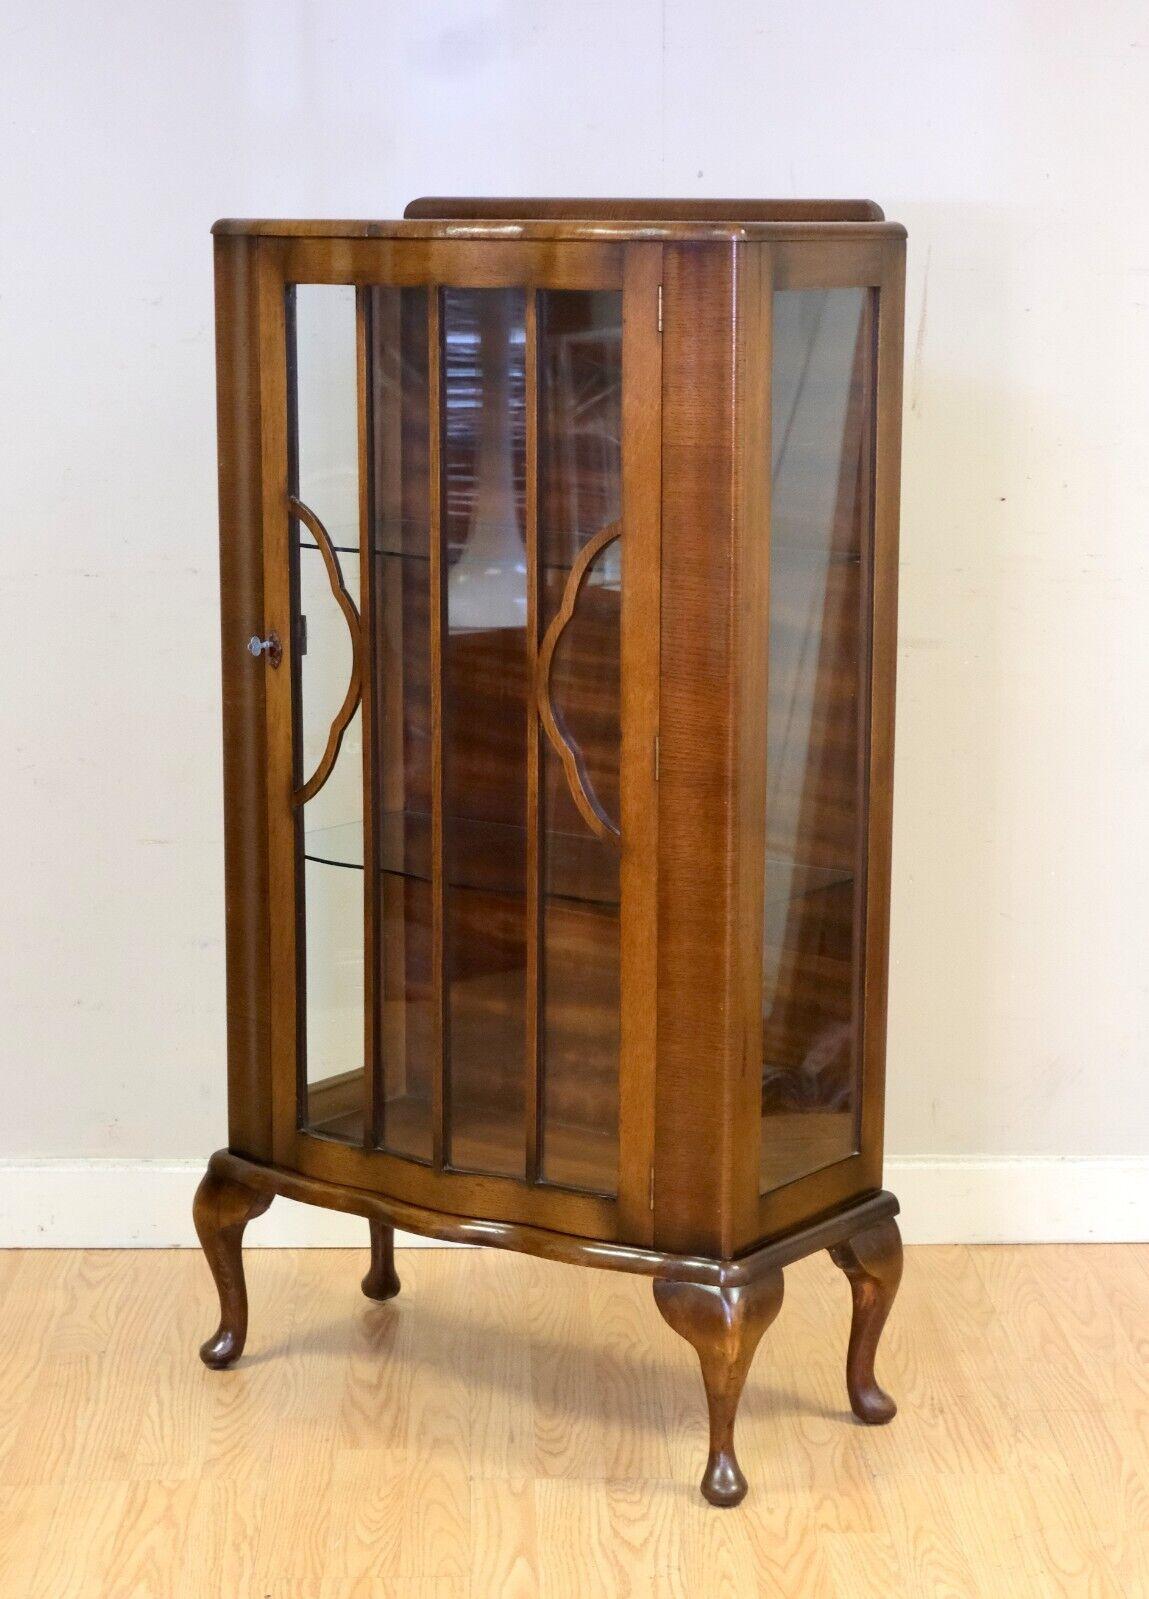 Edwardian SMALL GORGEOUS WALNUT GLAZED BOOKCASE WiTH GLASS SHELVES ON QUEEN ANN STYLE LEGS For Sale